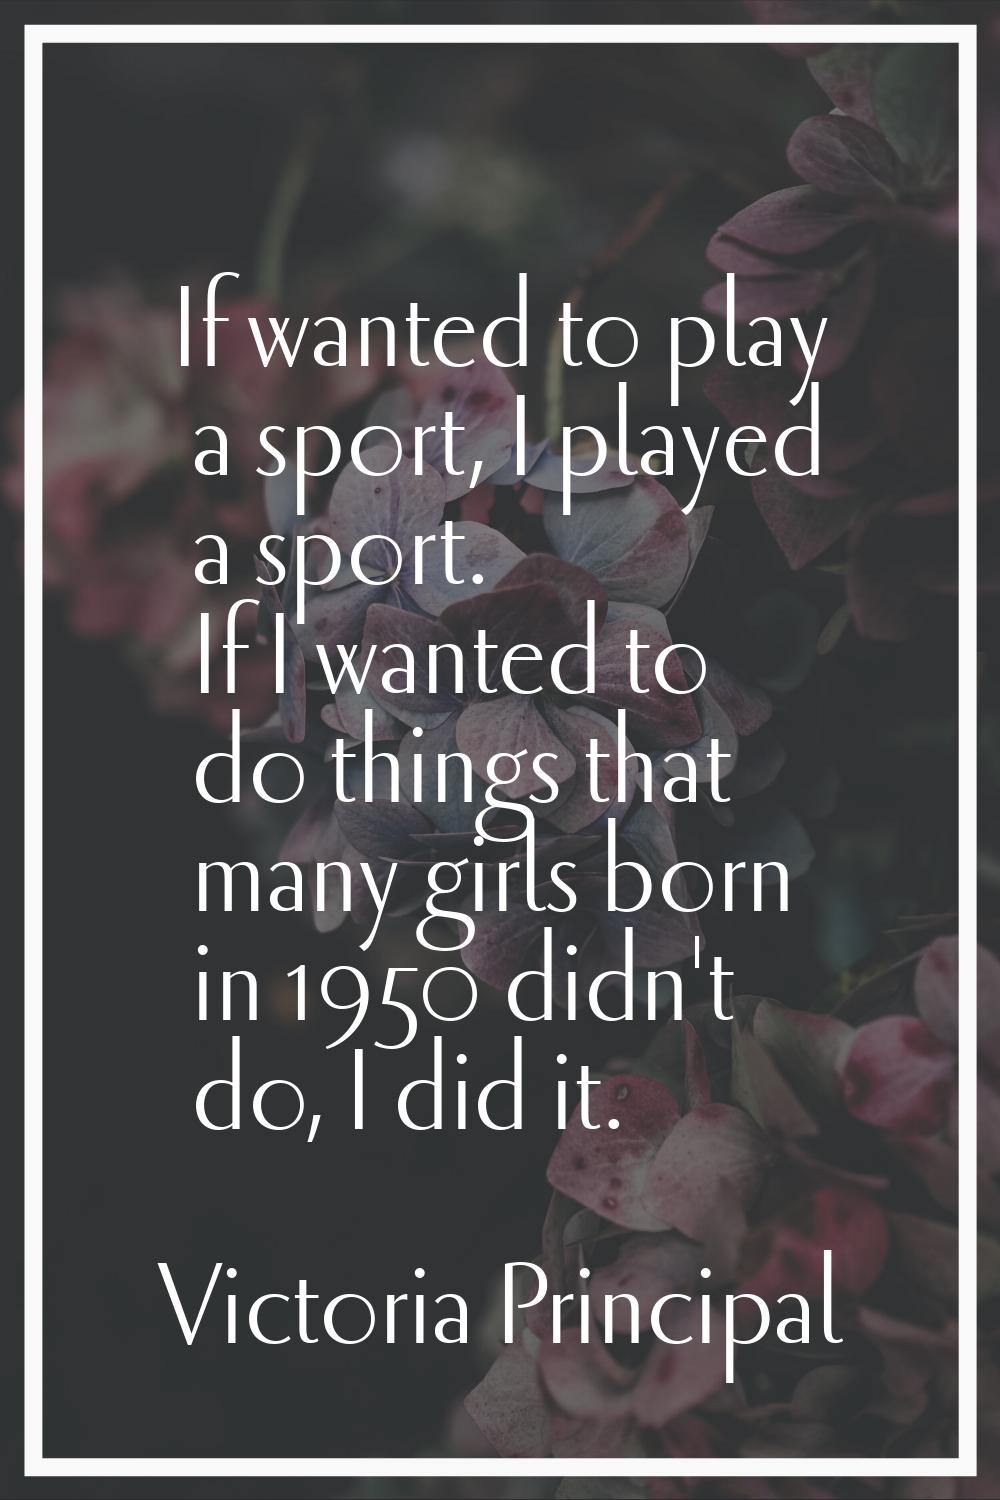 If wanted to play a sport, I played a sport. If I wanted to do things that many girls born in 1950 